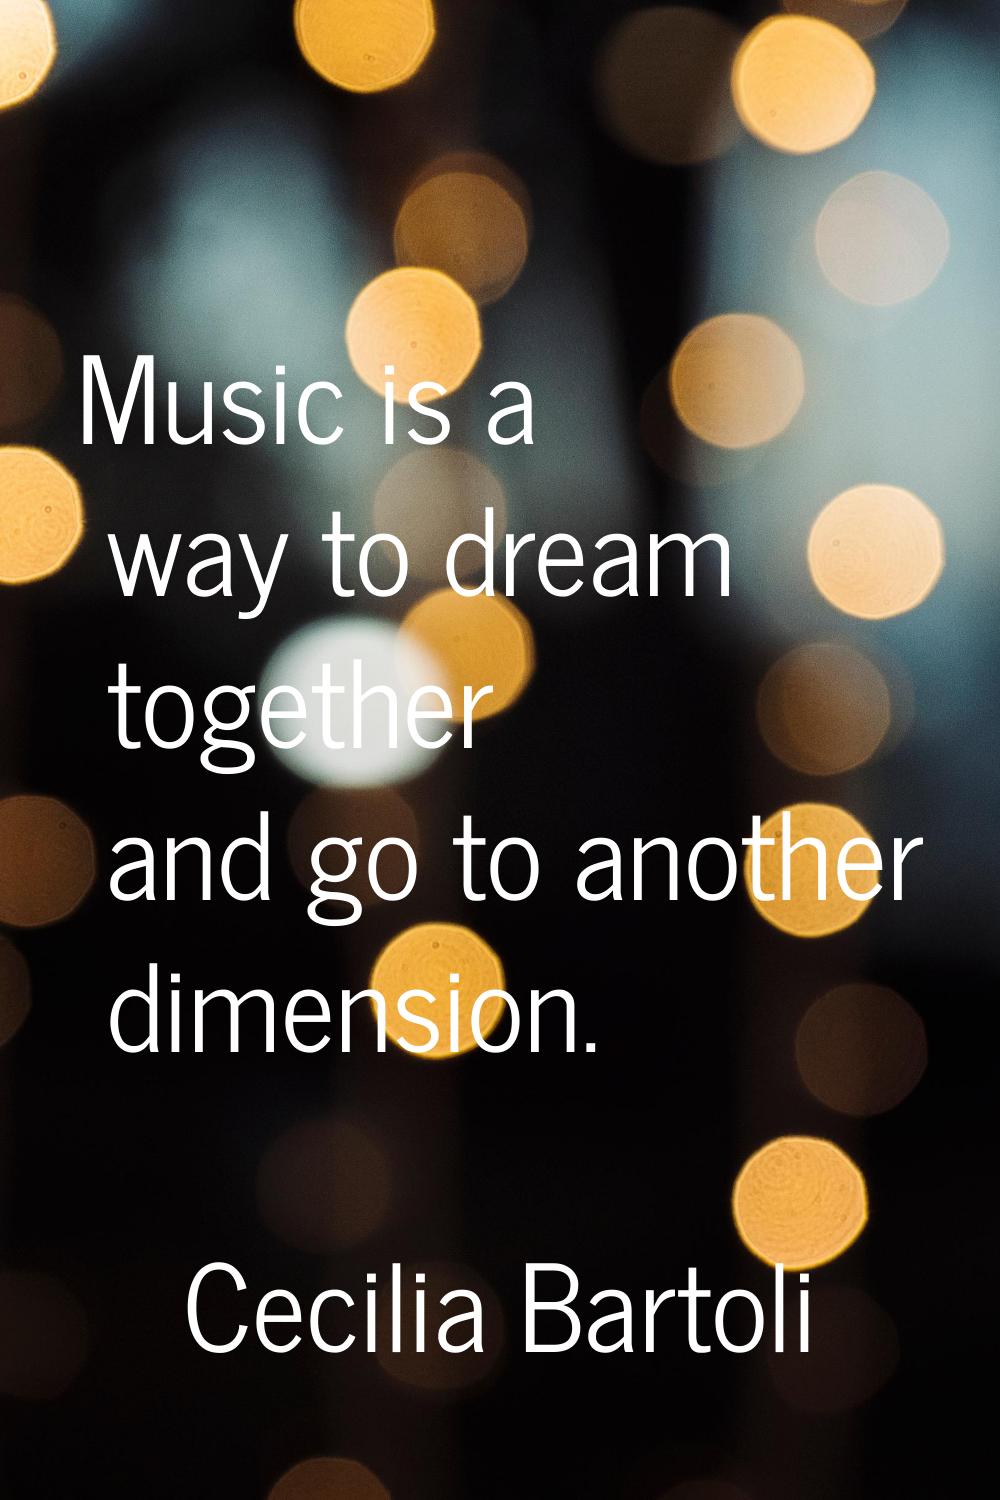 Music is a way to dream together and go to another dimension.